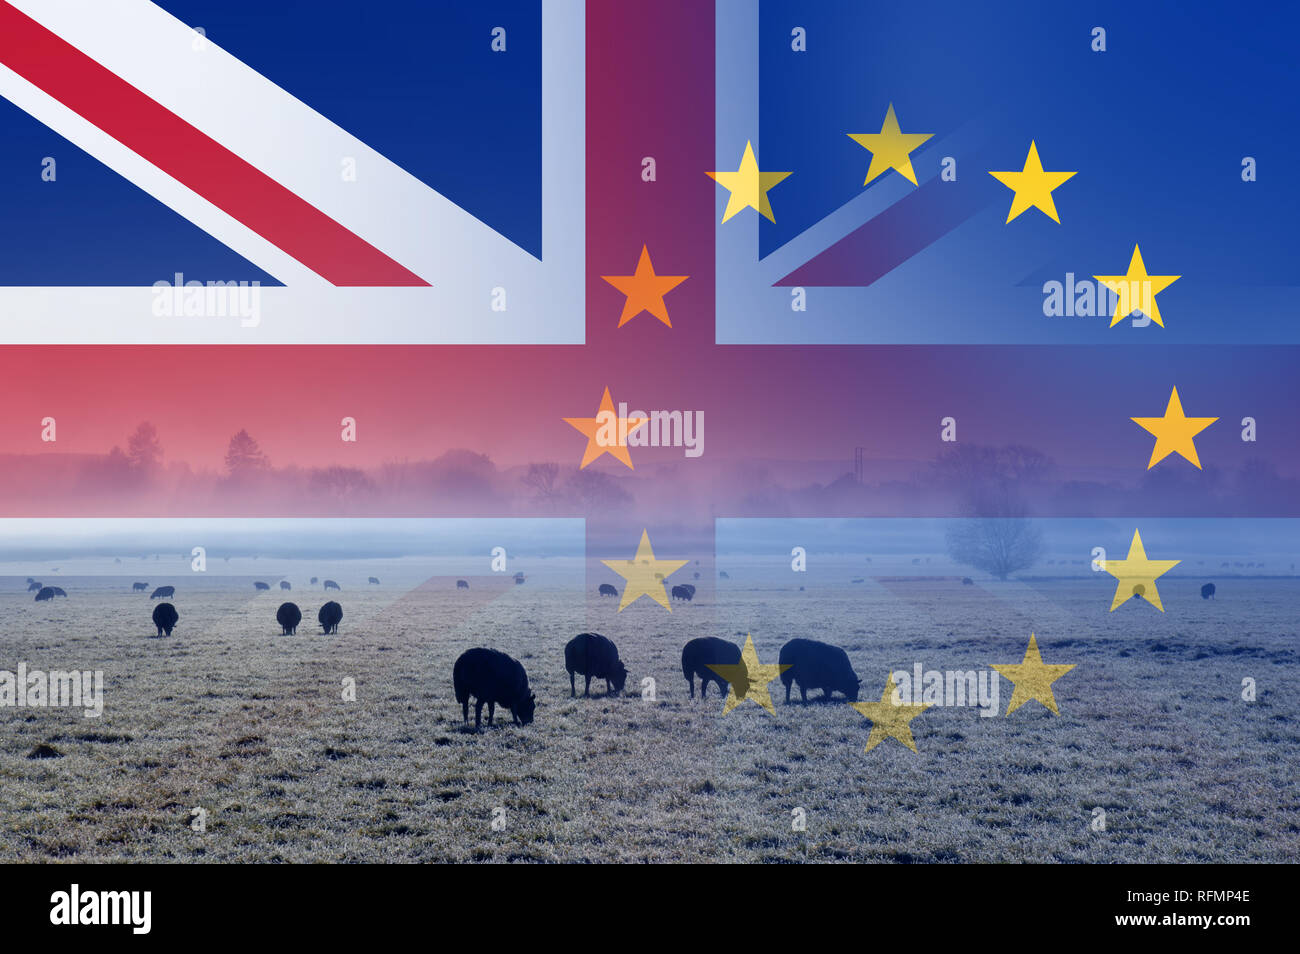 Brexit concept, The English countryside with sheep in a field with the Union Jack and E.U flags over layered on top. Stock Photo